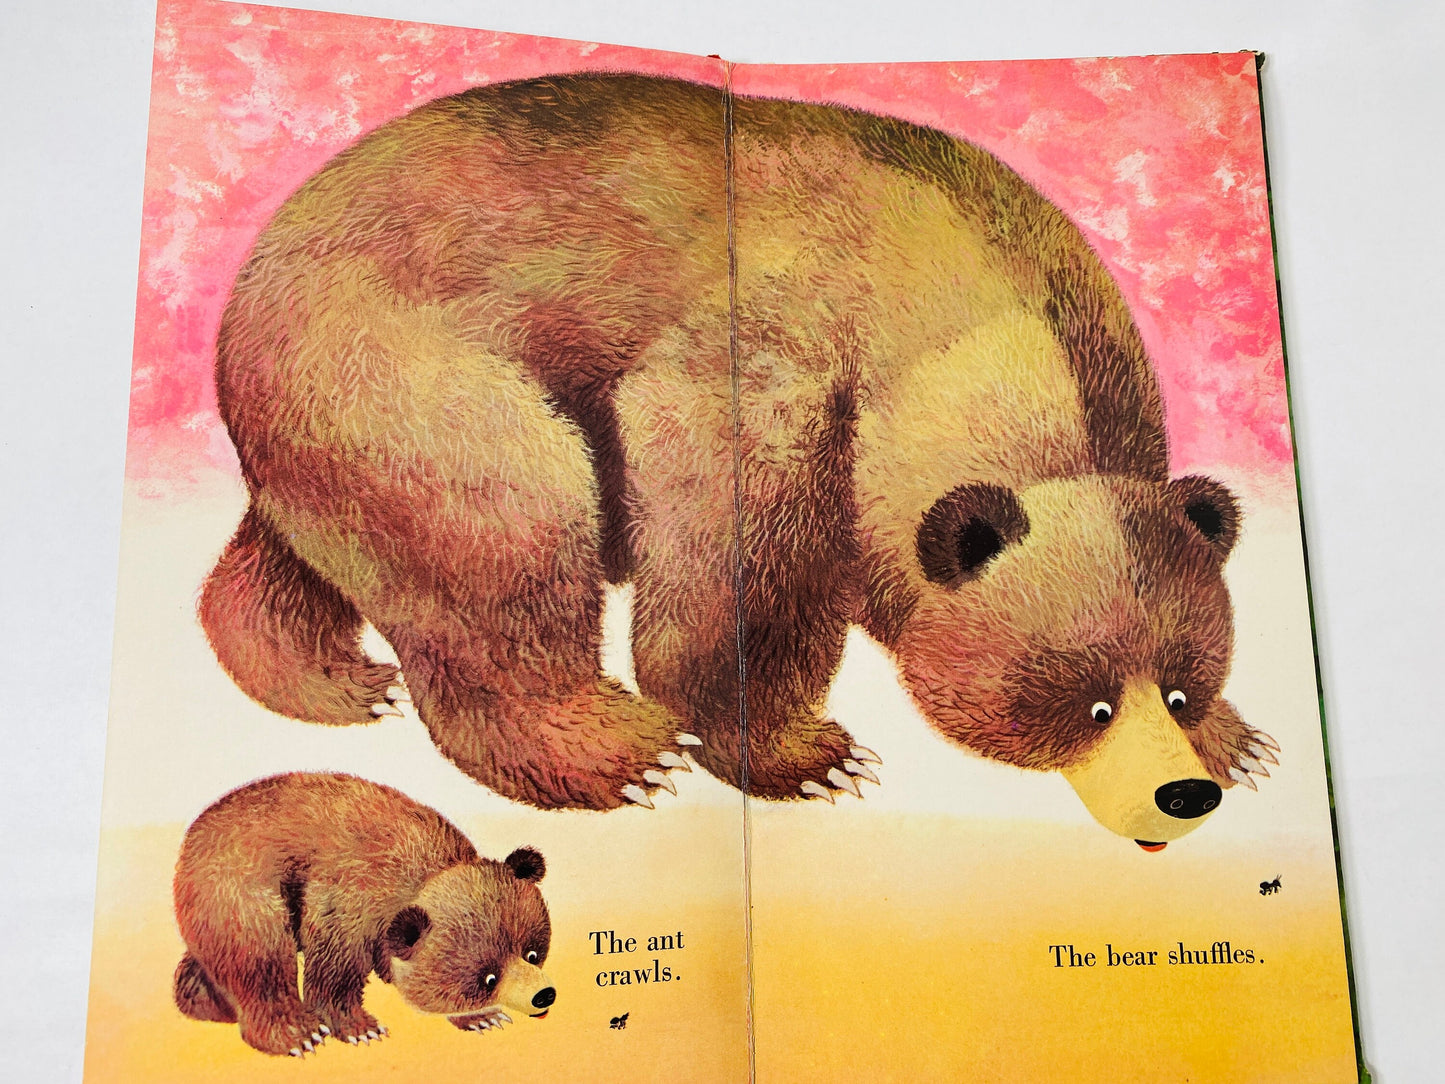 1975 Richard Scarry What Animals Do Vintage children's Golden Sturdy Happy book by one of the world's leading illustrators.